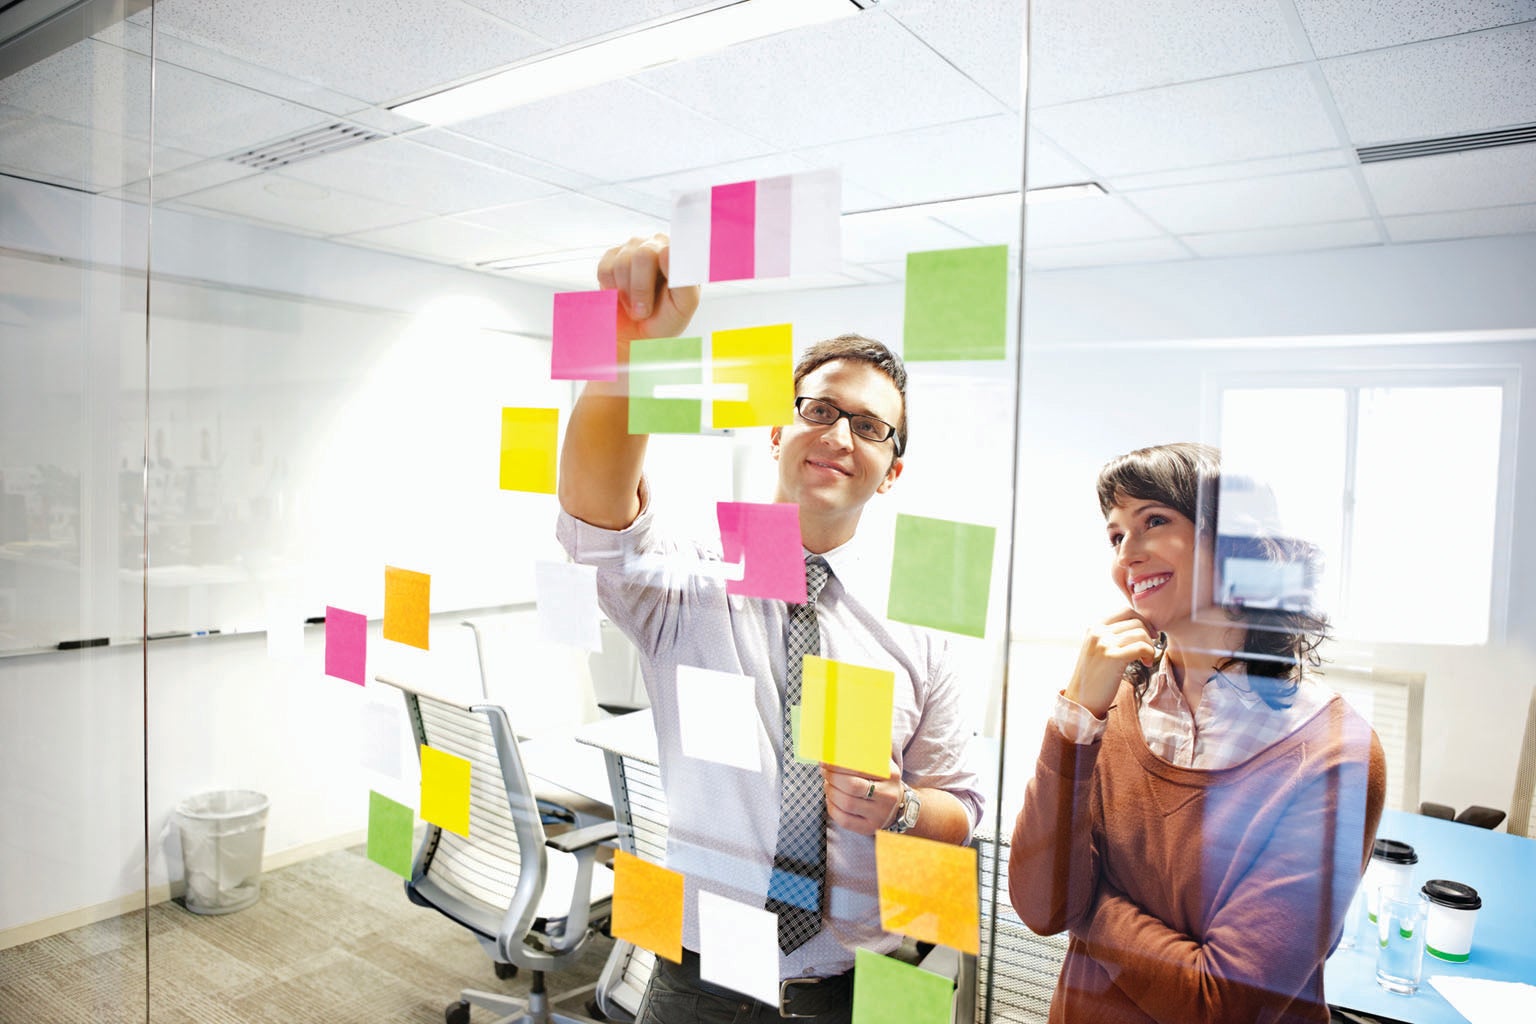 Man and woman smiling while posting notes on clear wall in office setting.